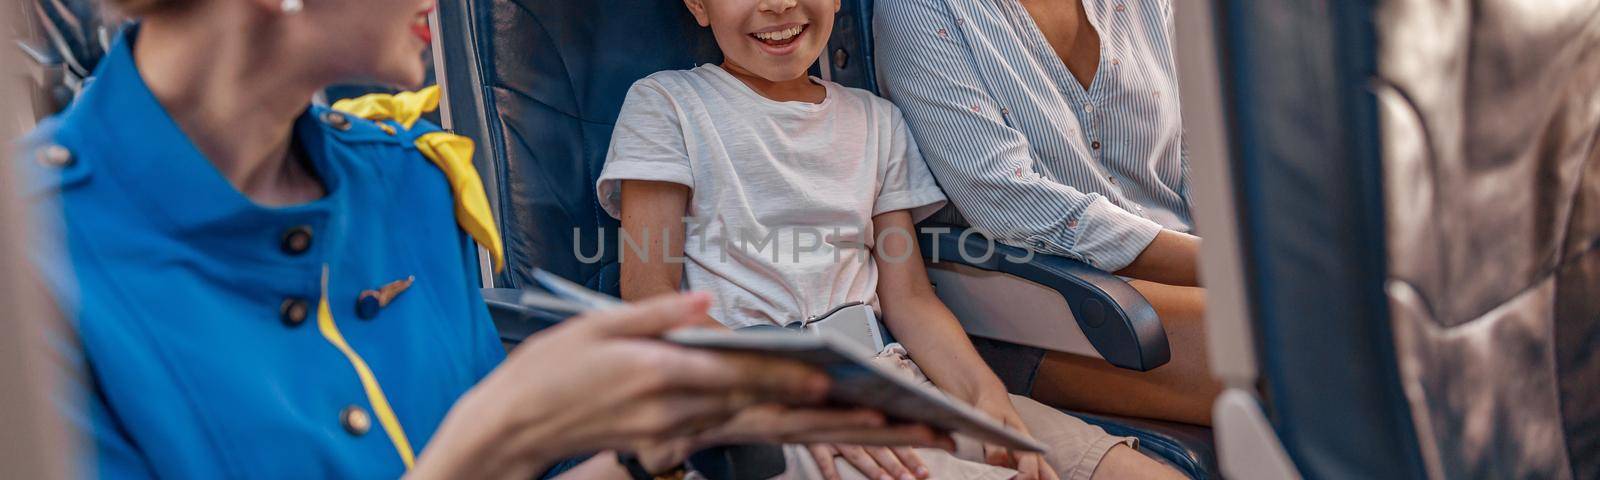 Female air hostess trying to entertain a kid on the plane by offering a book to read. Cabin crew provide service to family in airplane. Airline transportation and tourism concept